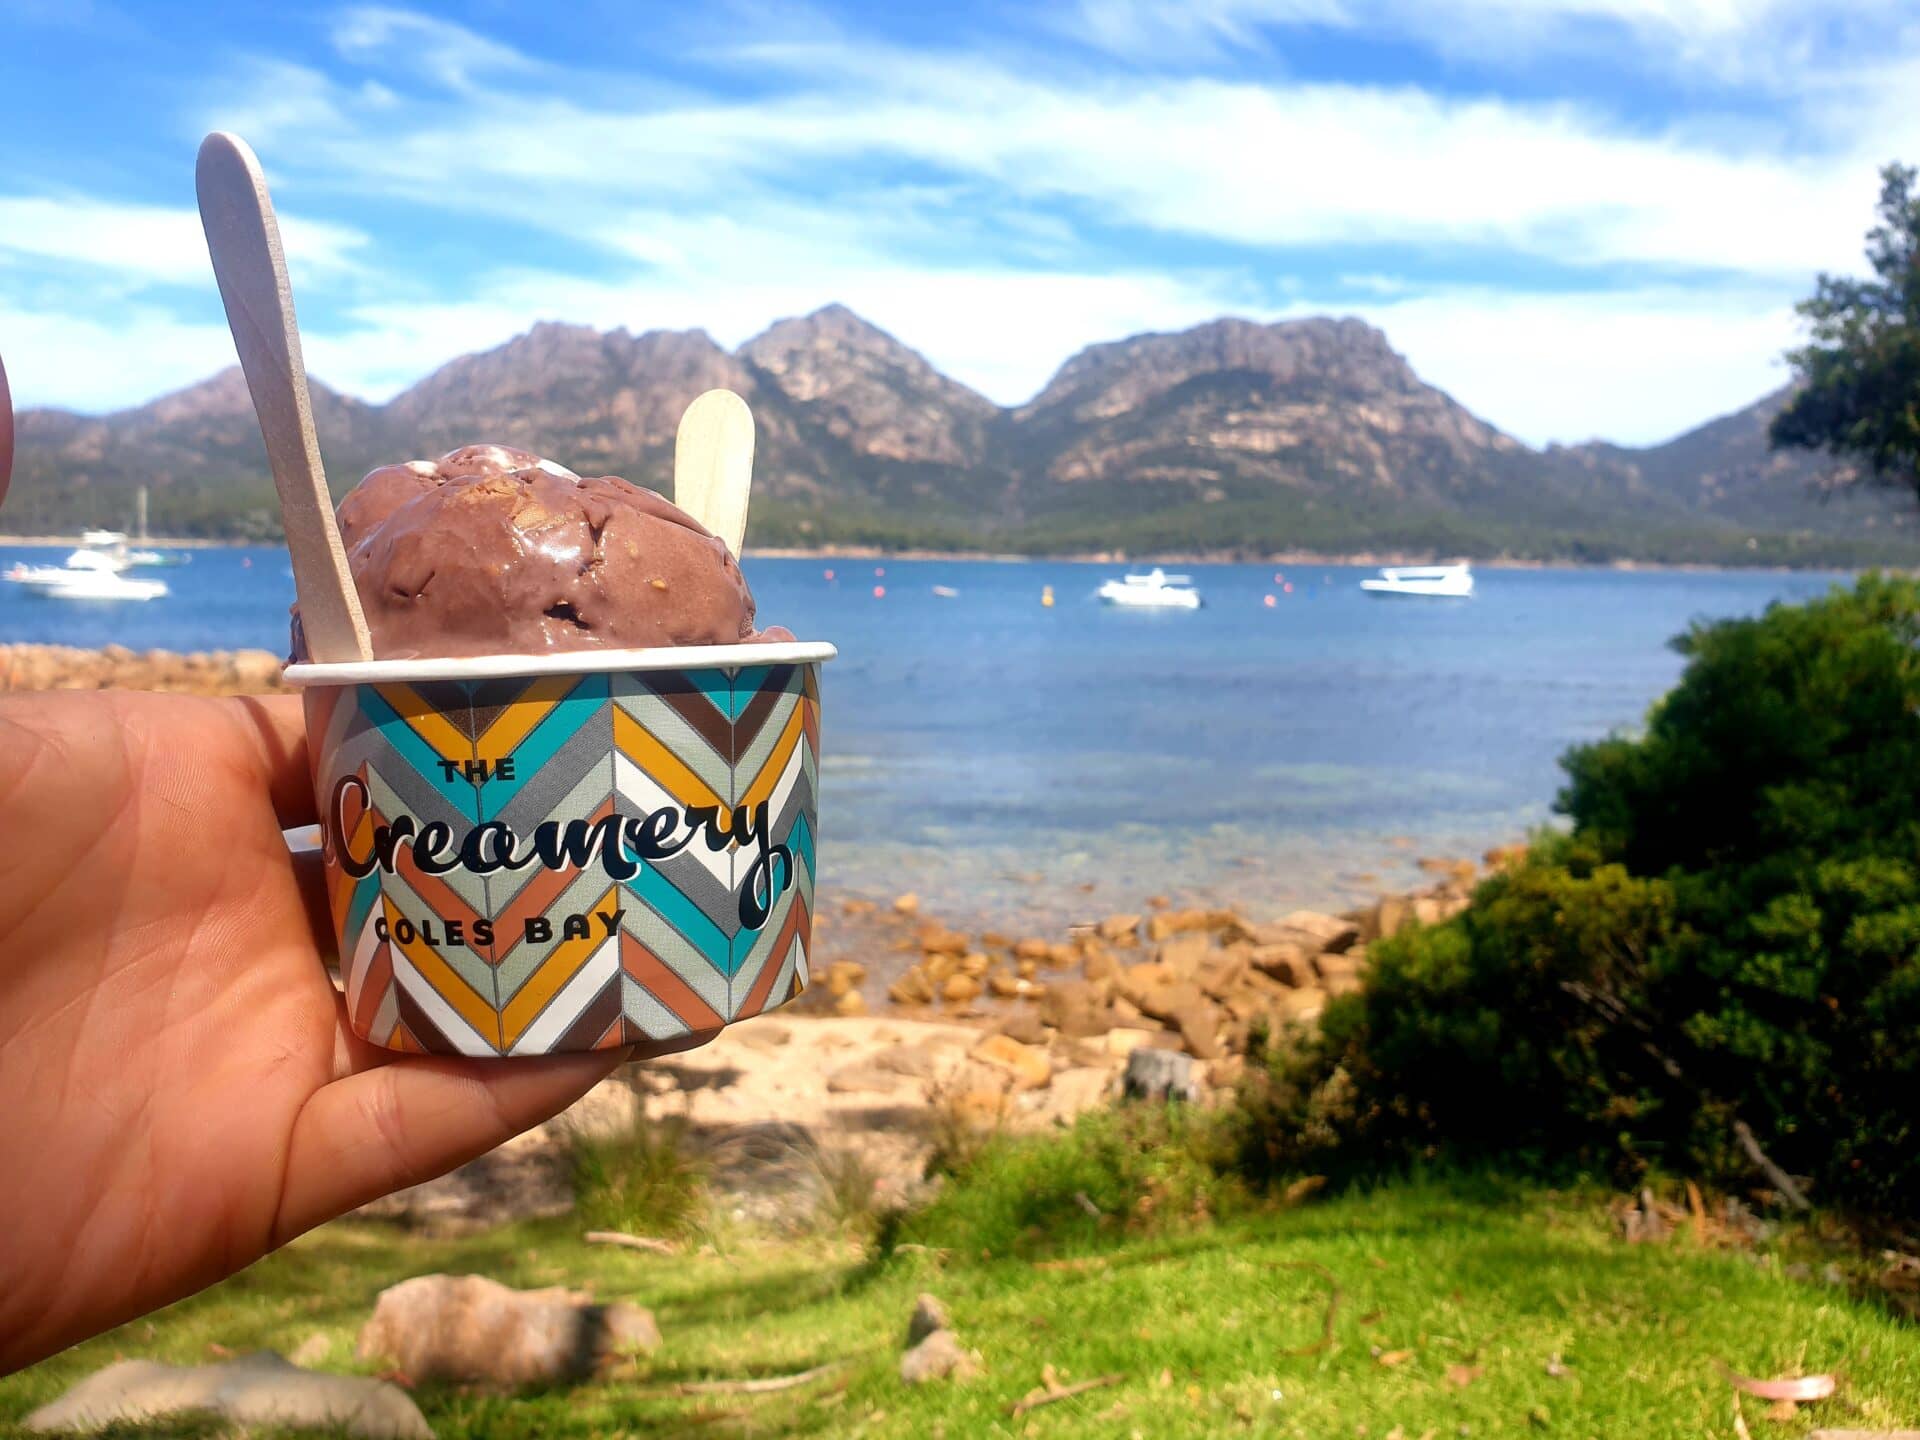 Most beautiful places-ice cream in coles bay views of Mt amos